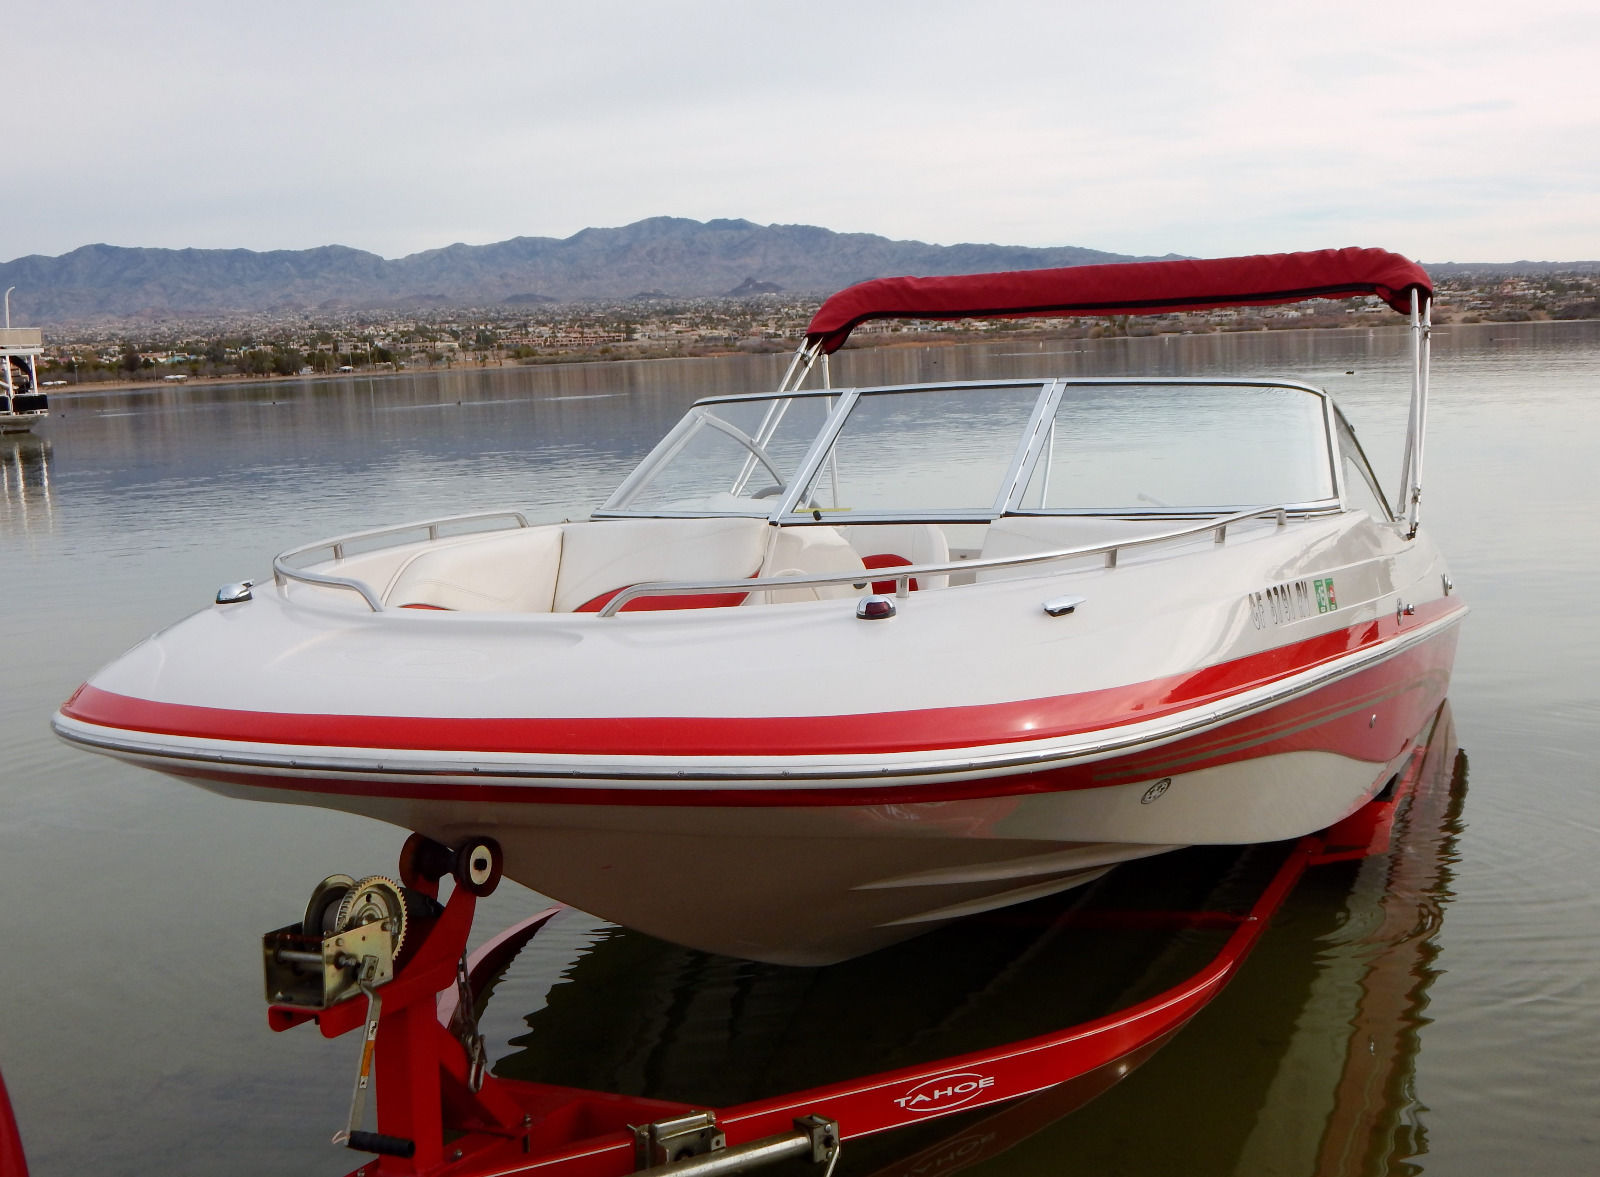 Tahoe 2006 for sale for $17,900 - Boats-from-USA.com